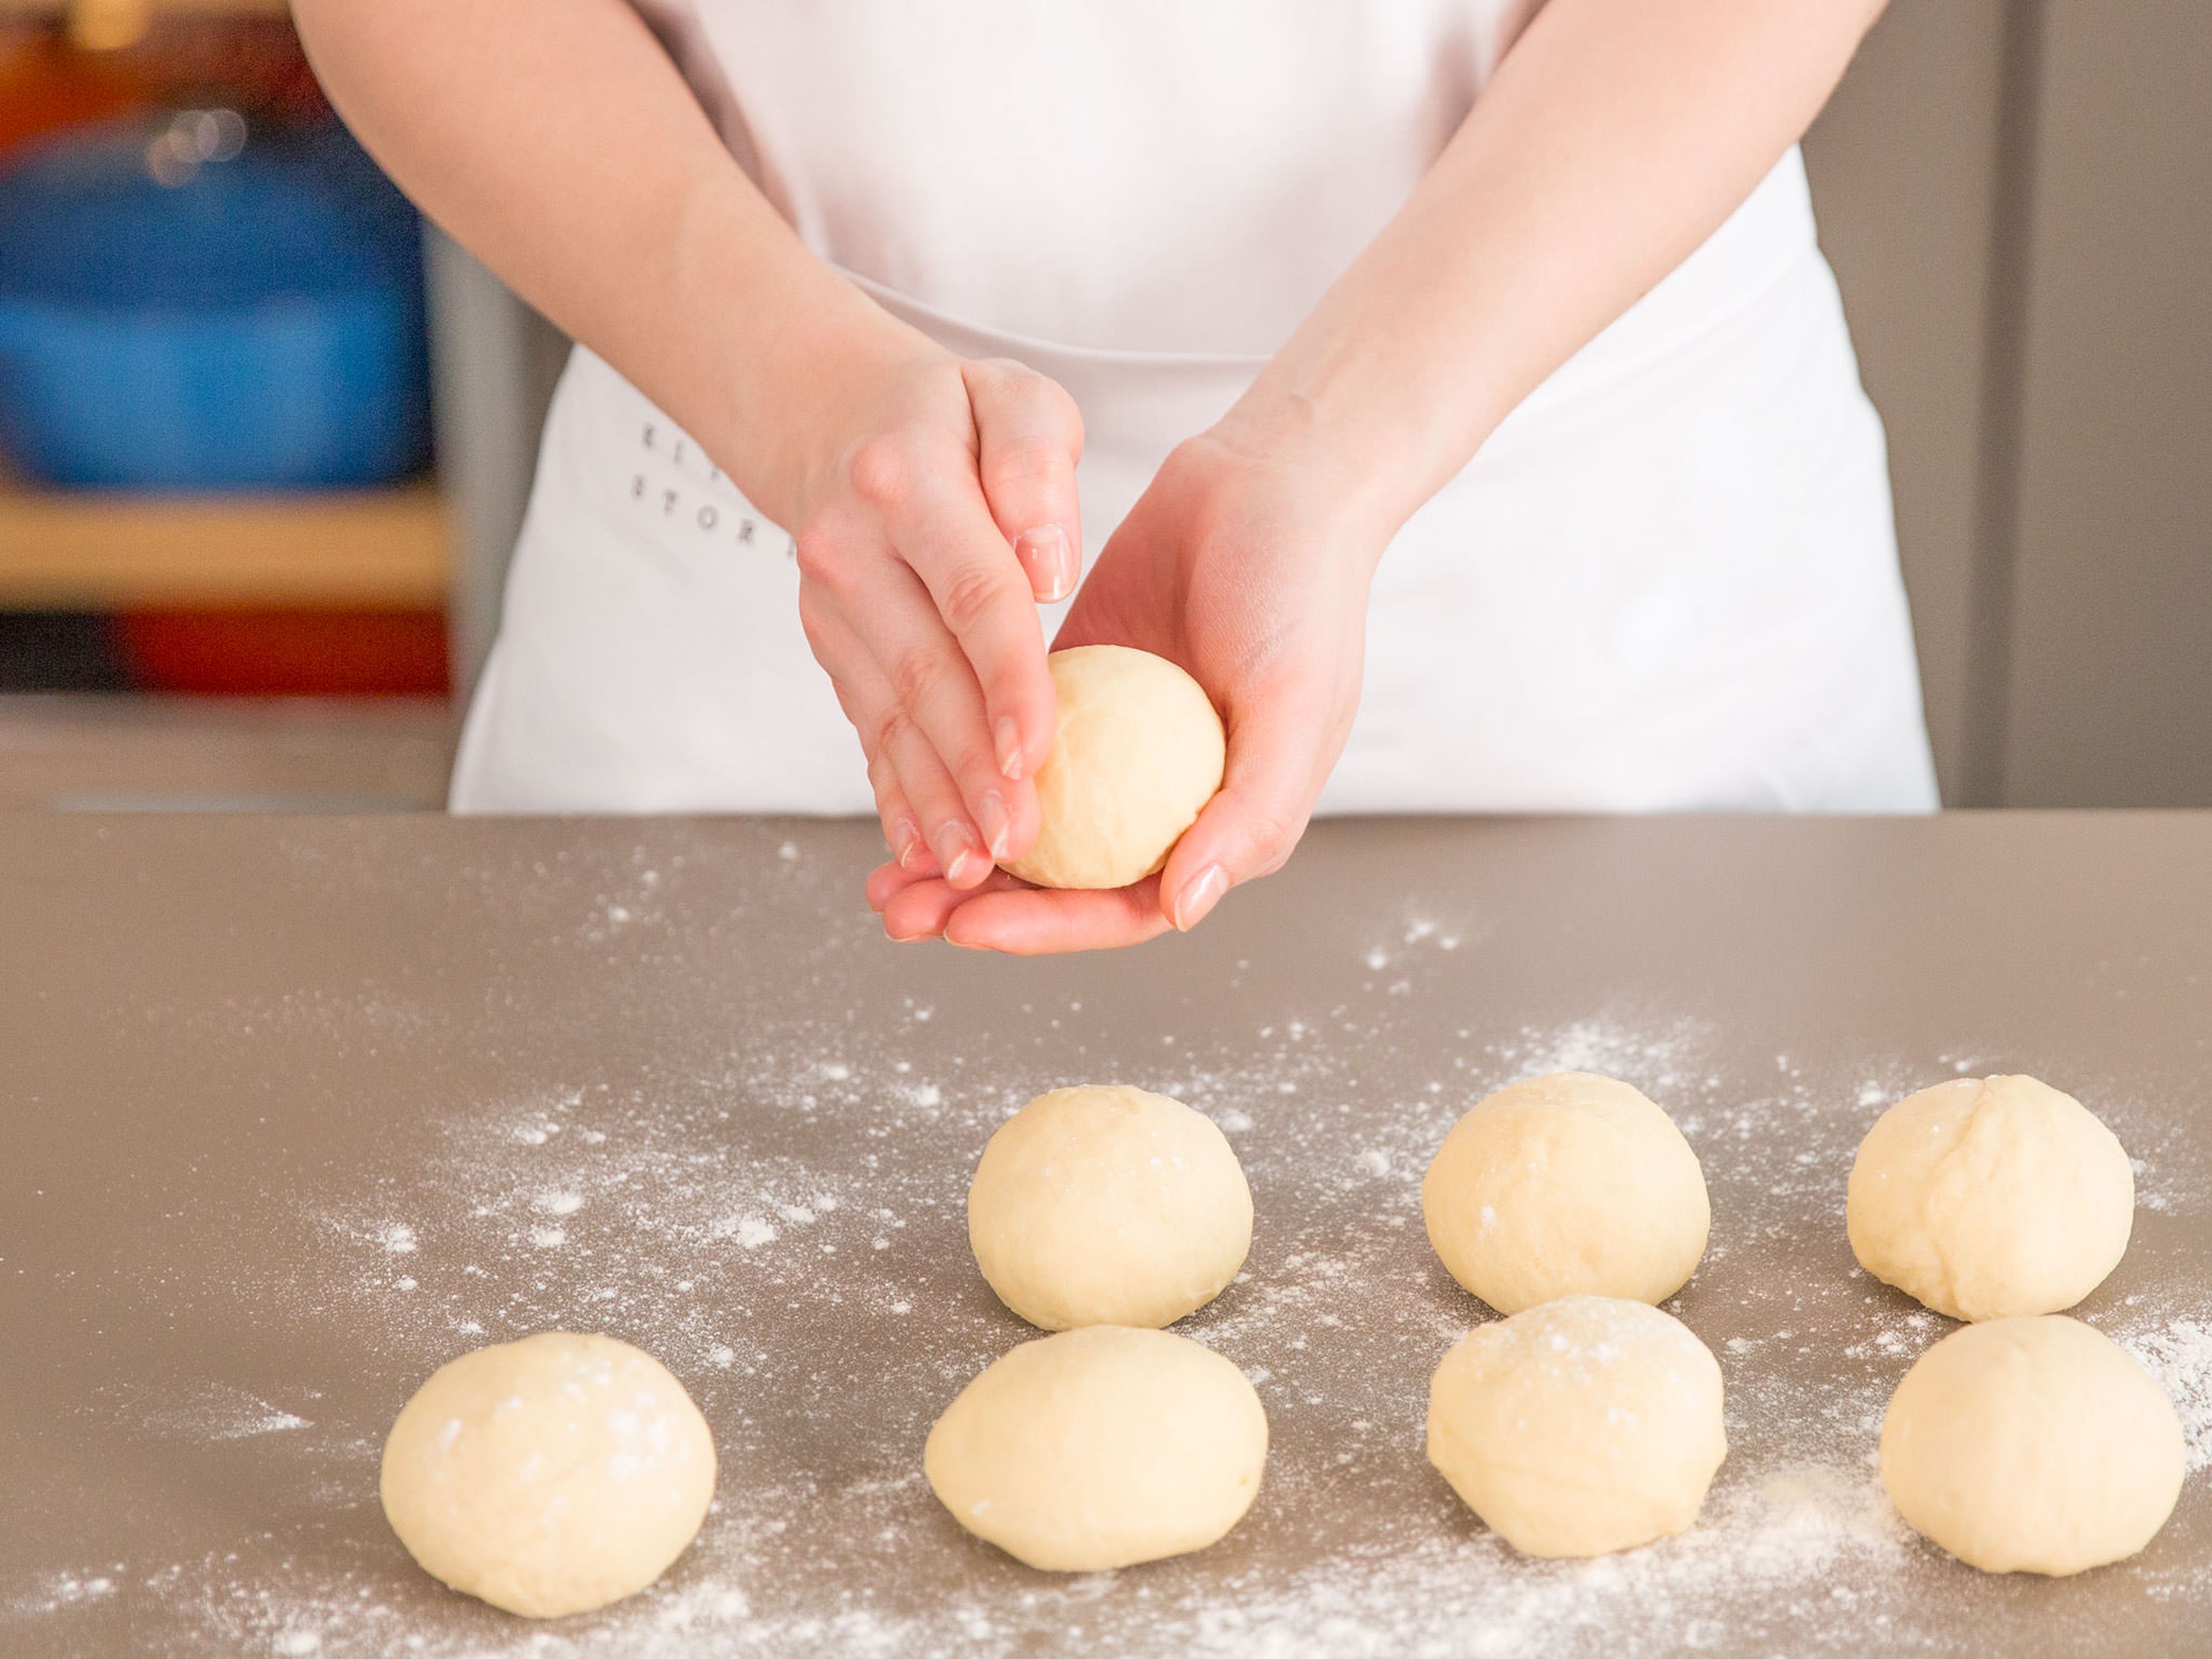 Turn out dough onto a floured work surface, cut in half, and then cut halves into pieces approx. the size of a small closed fist. Knead each piece by hand into small rounds. Cover and let rise for another 30 min.